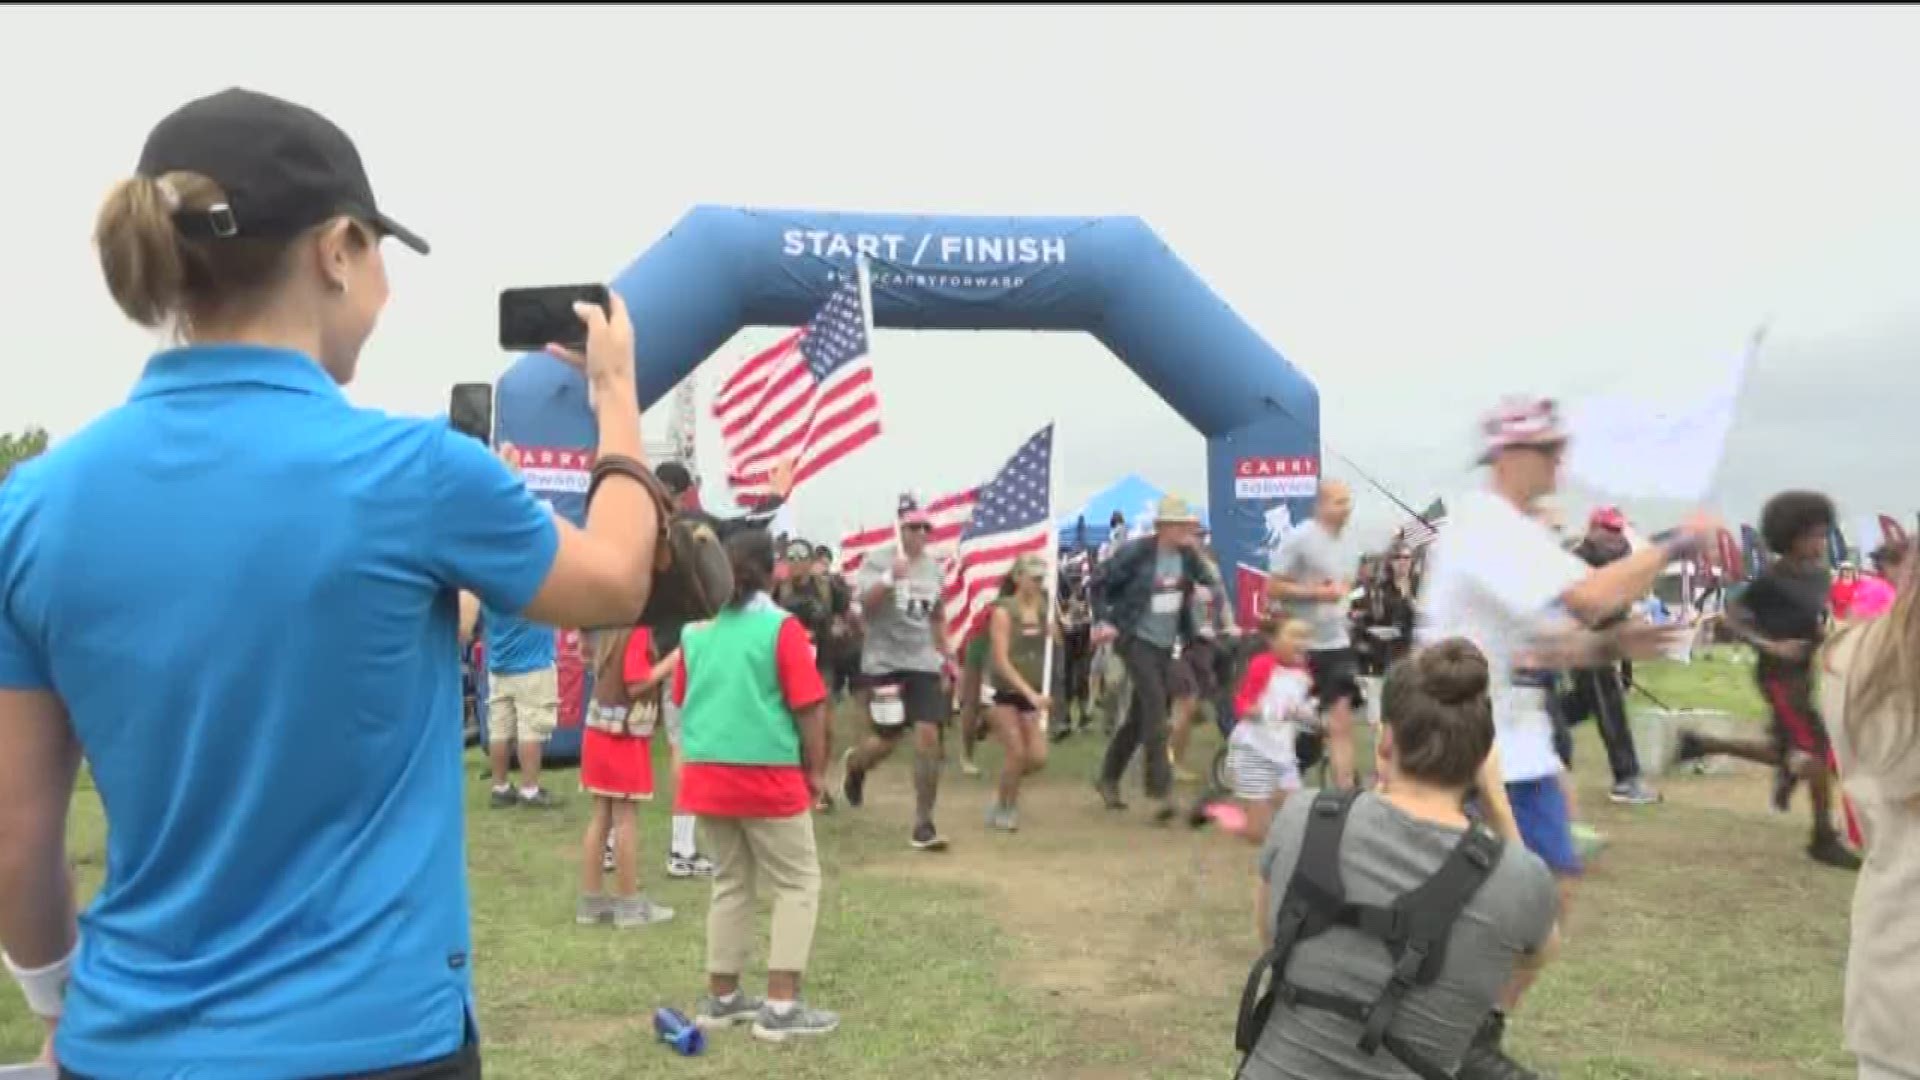 The 5K held August 24 will help honor and empower wounded warriors.